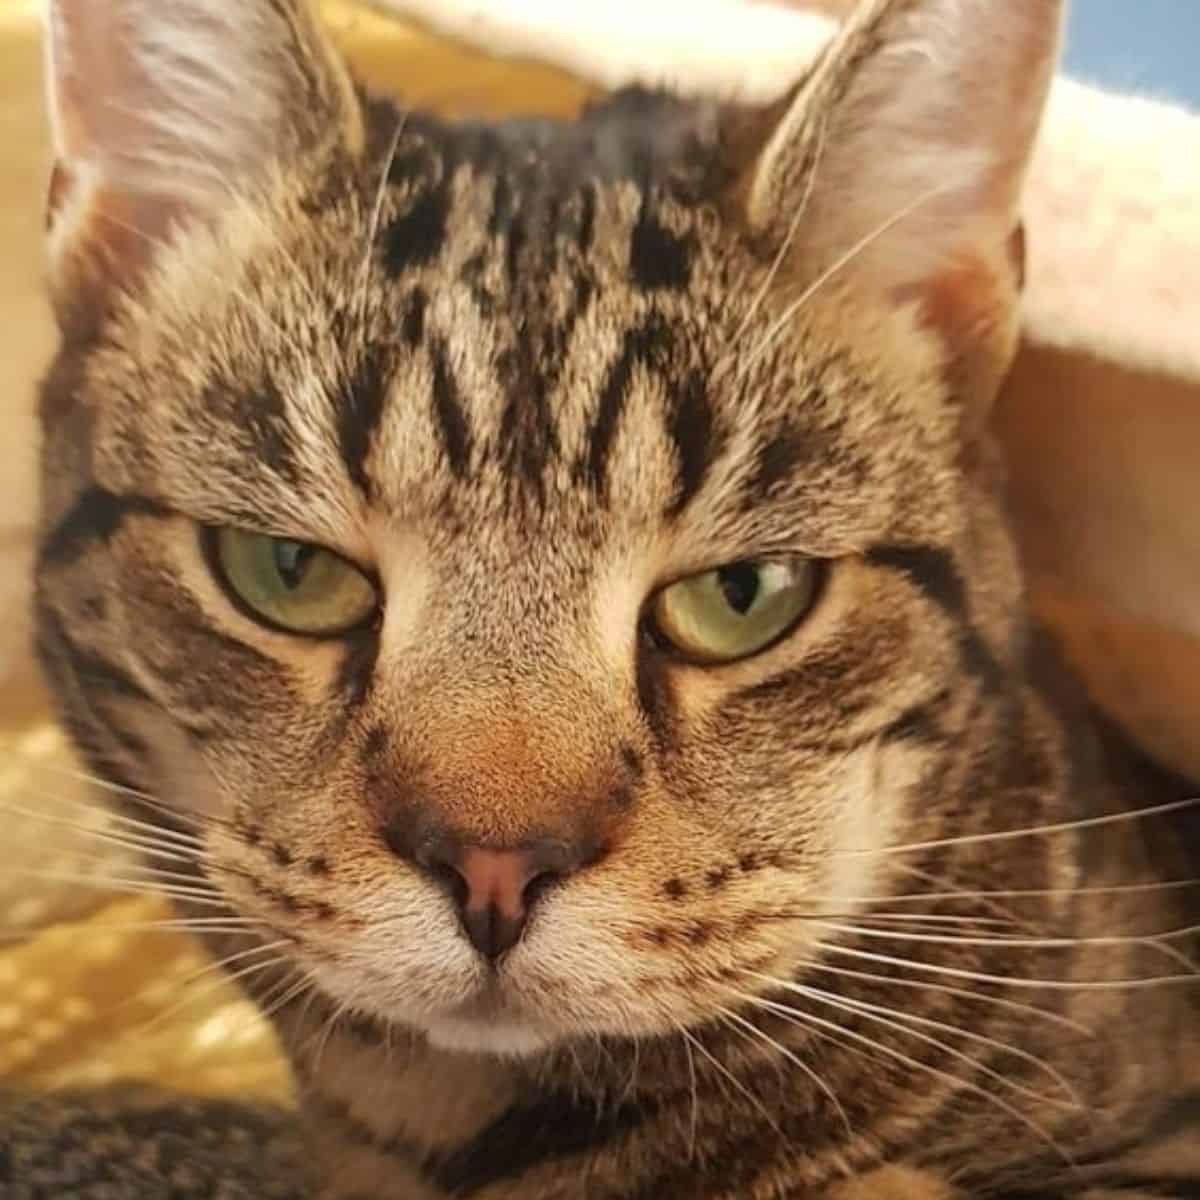 photo of a cat with a slightly swollen head